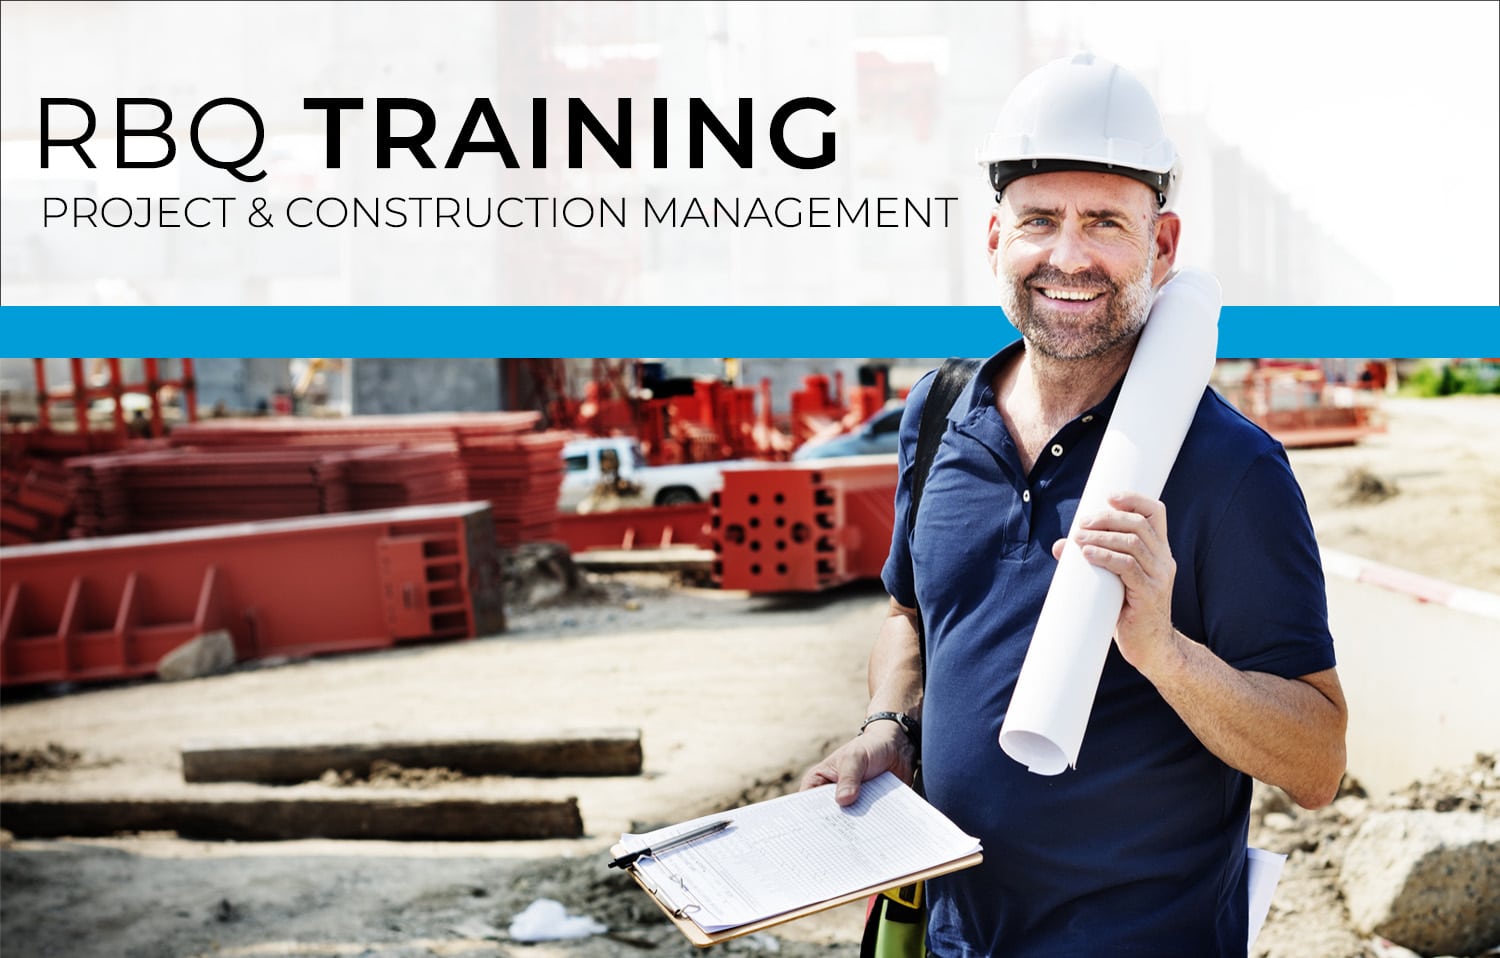 Online RBQ training for the preparation of the construction site project management exam